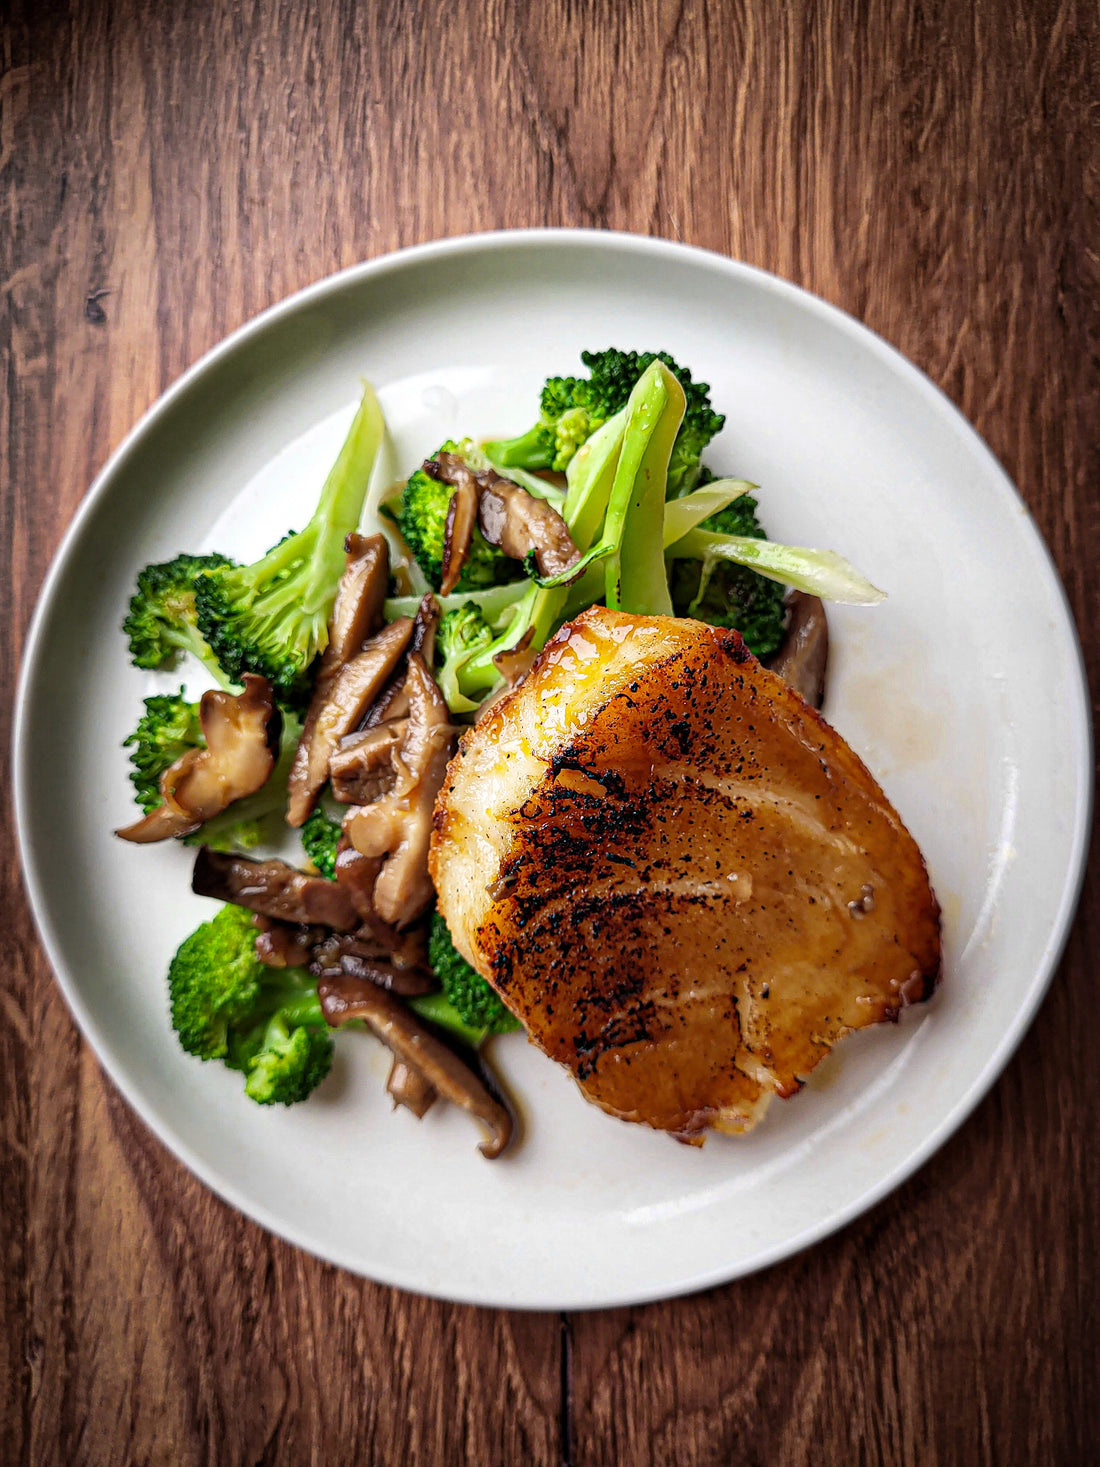 Hoisin Chilean Seabass with Mushrooms and Broccoli